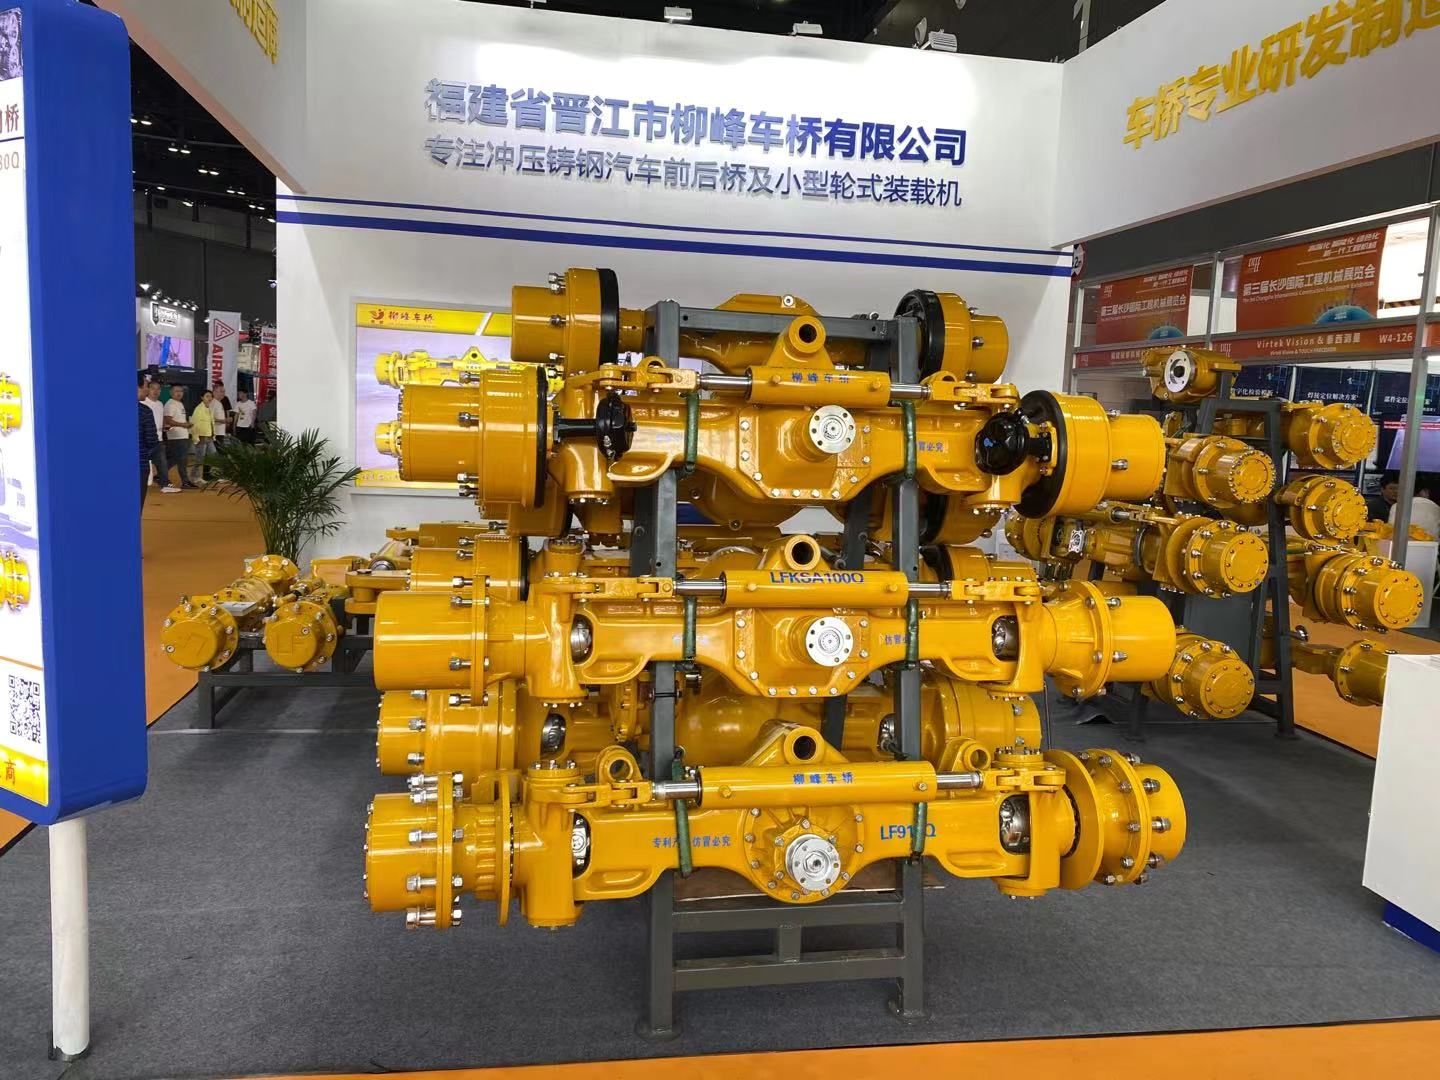 Liufeng Axle participated in Changsha International Construction Machinery Exhibition